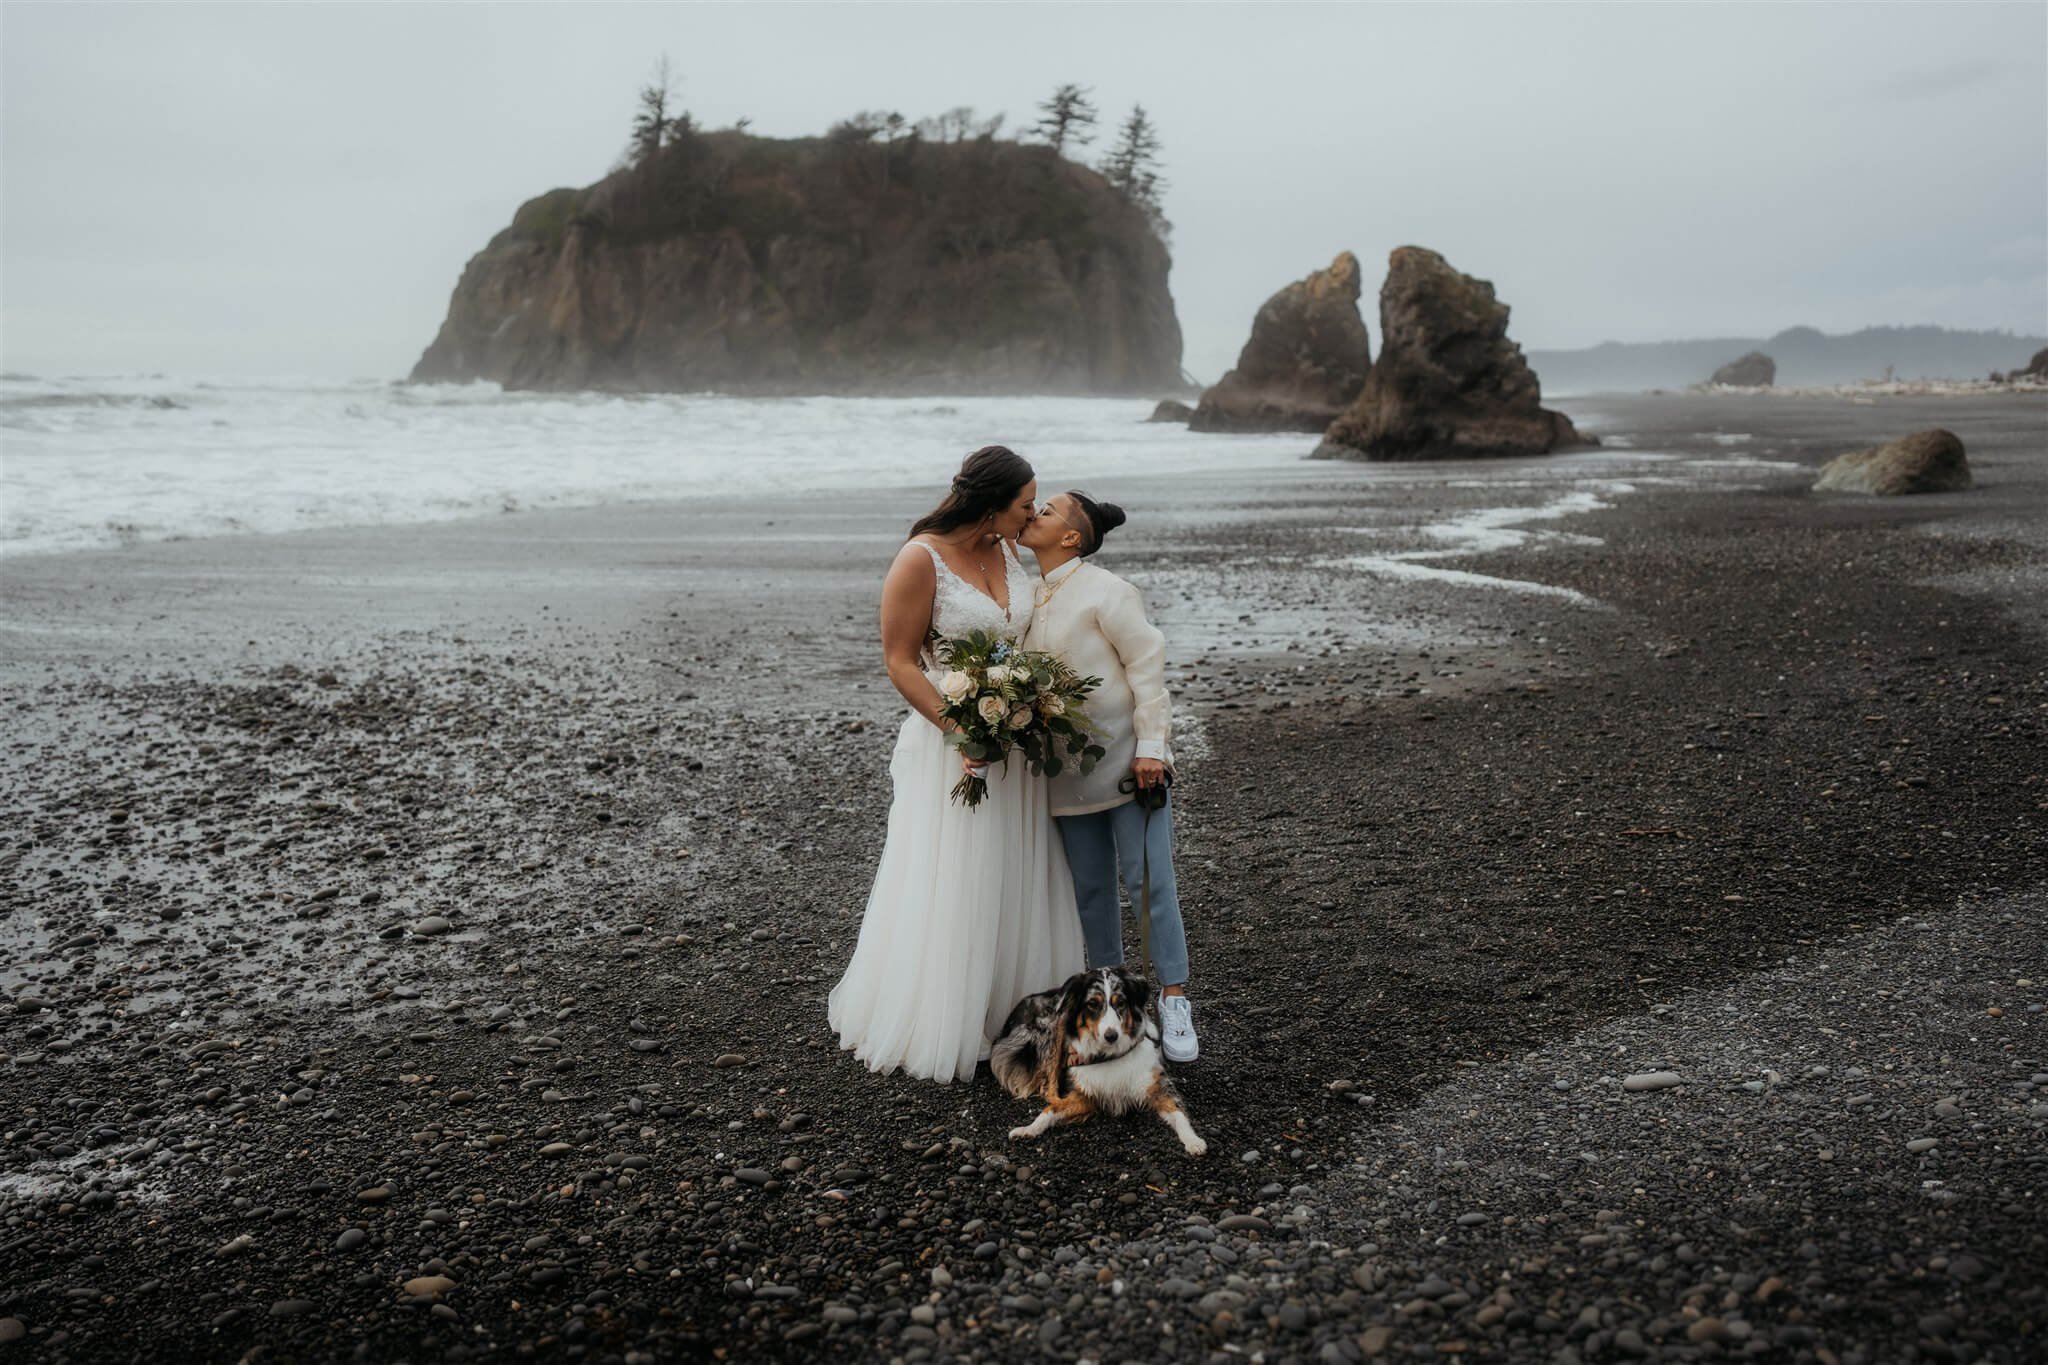 Brides kissing on Ruby Beach while dog lays at their feet